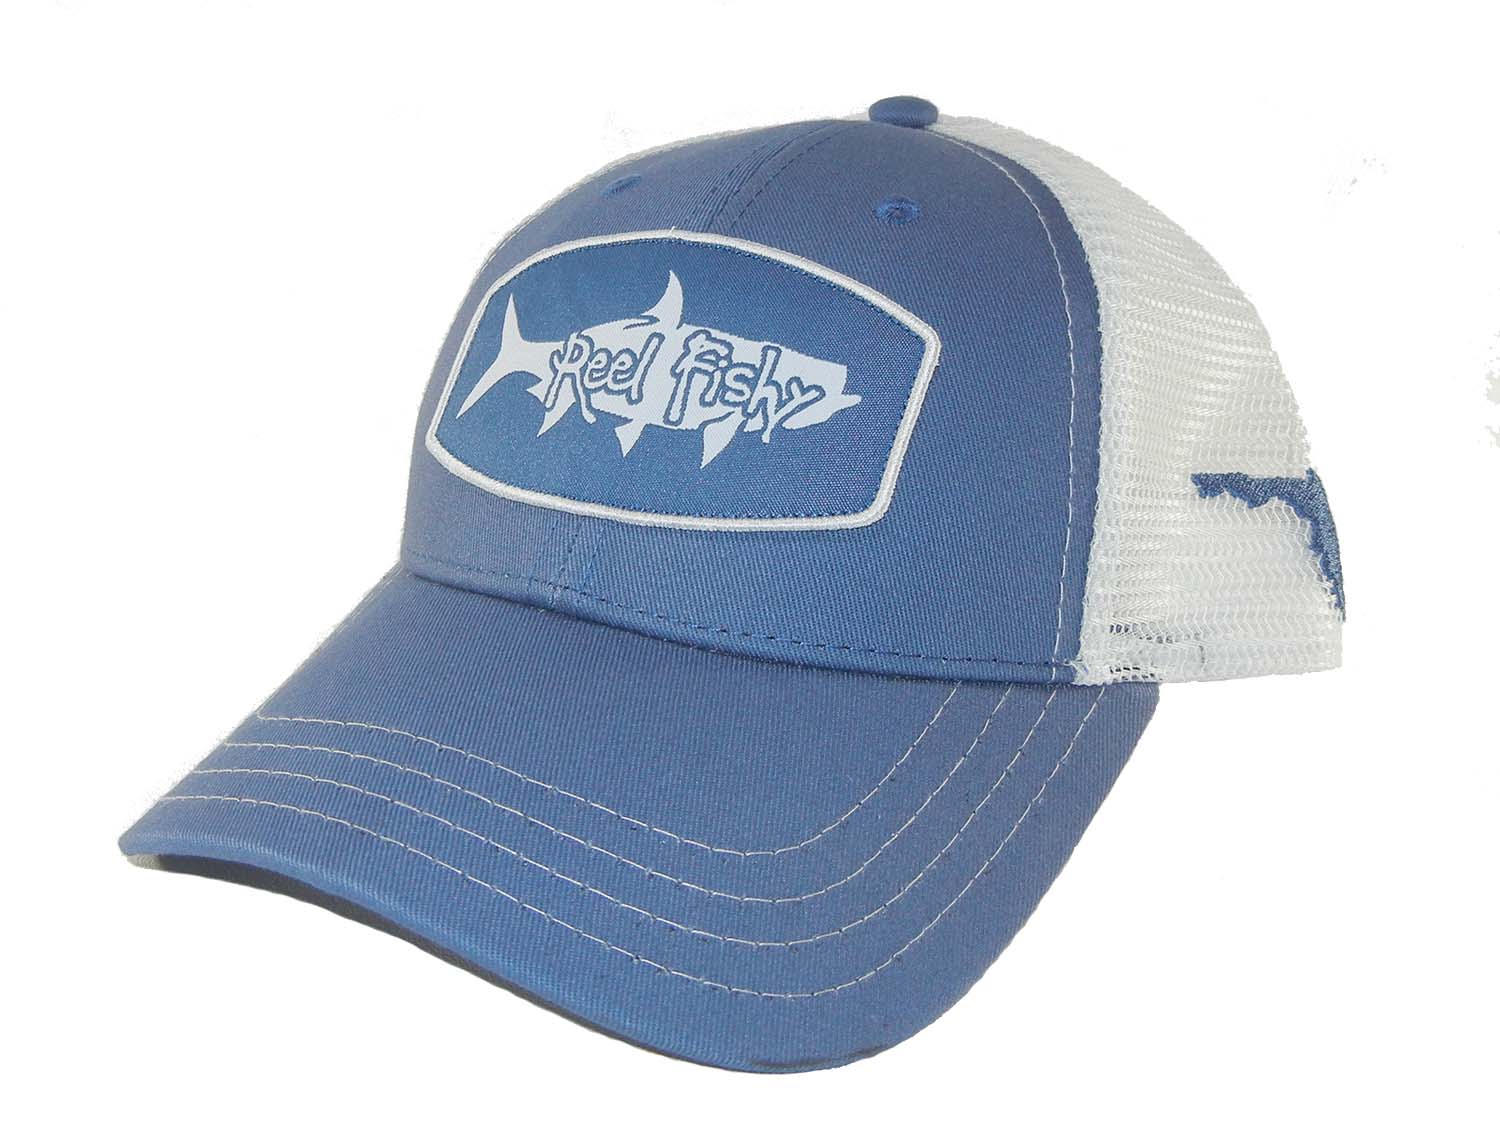 Tarpon Fishing Patch Trucker Hats with State of Florida Logo -*5 Colors! Navy w/Red Patch